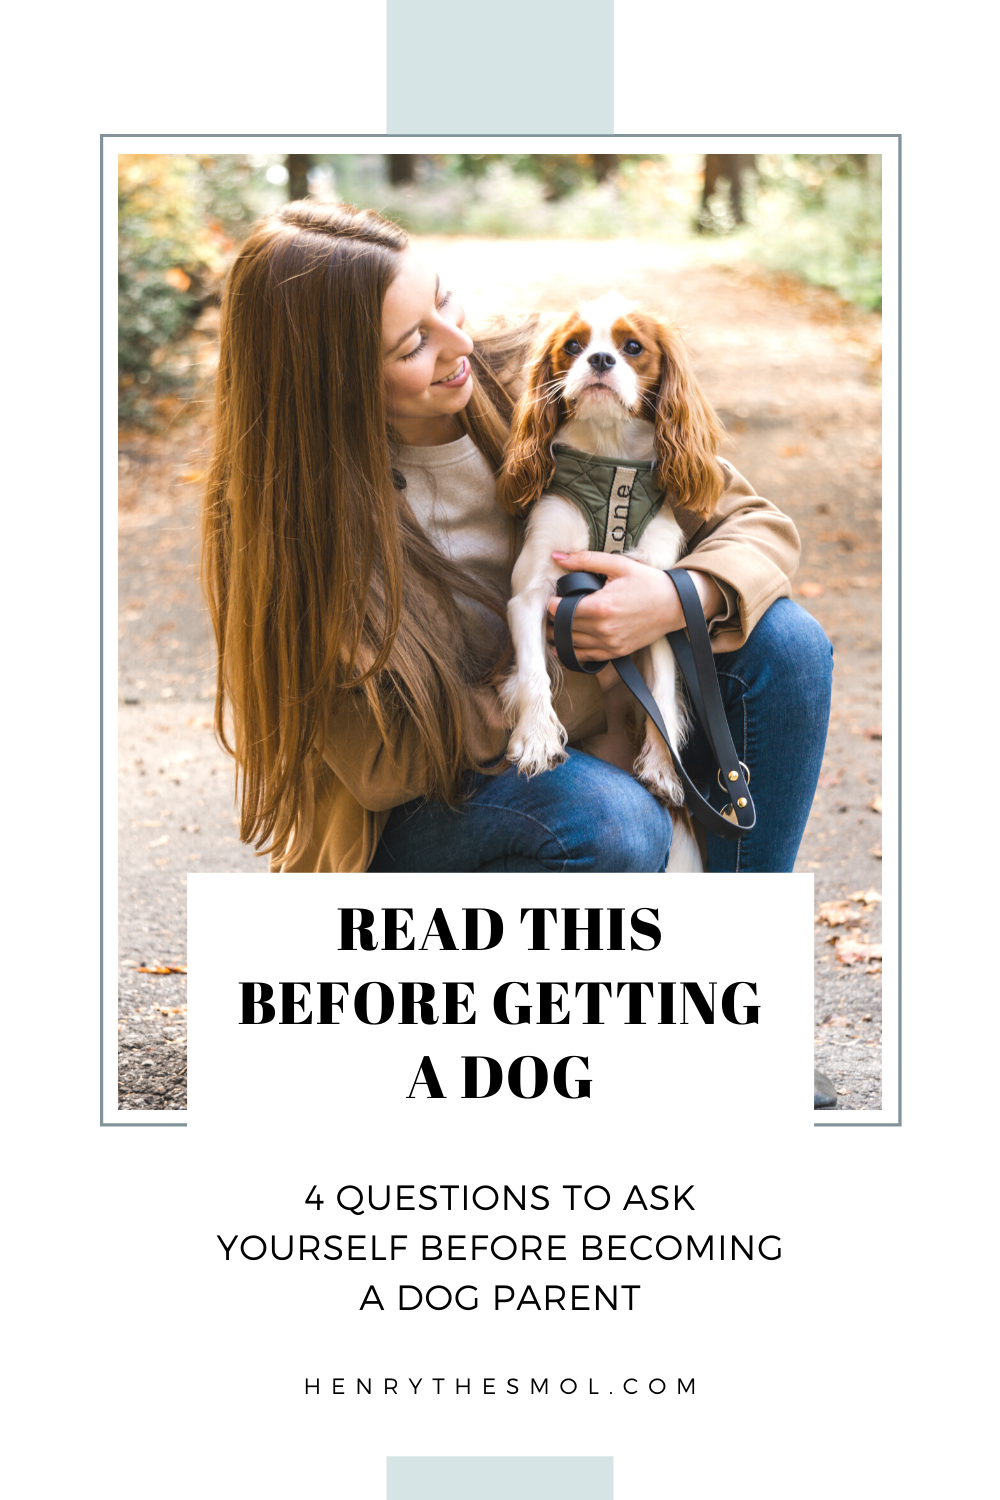 4 Signs You\'re Ready to Become a Dog Parent